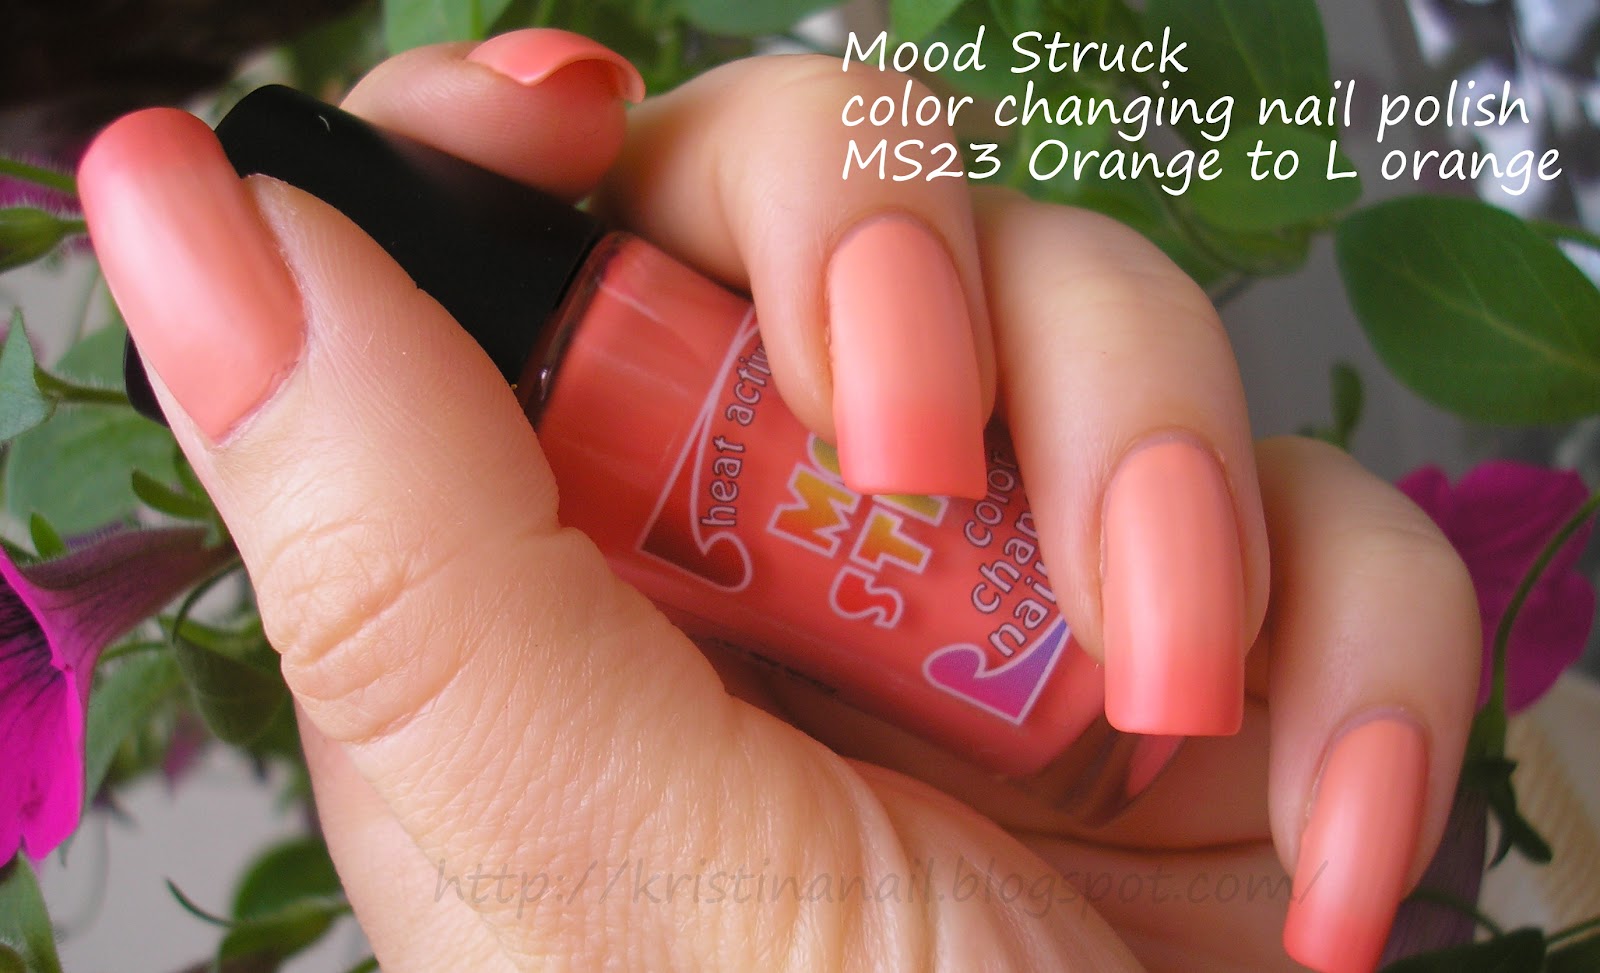 4. Color Changing Nail Polish by Claire's - wide 3